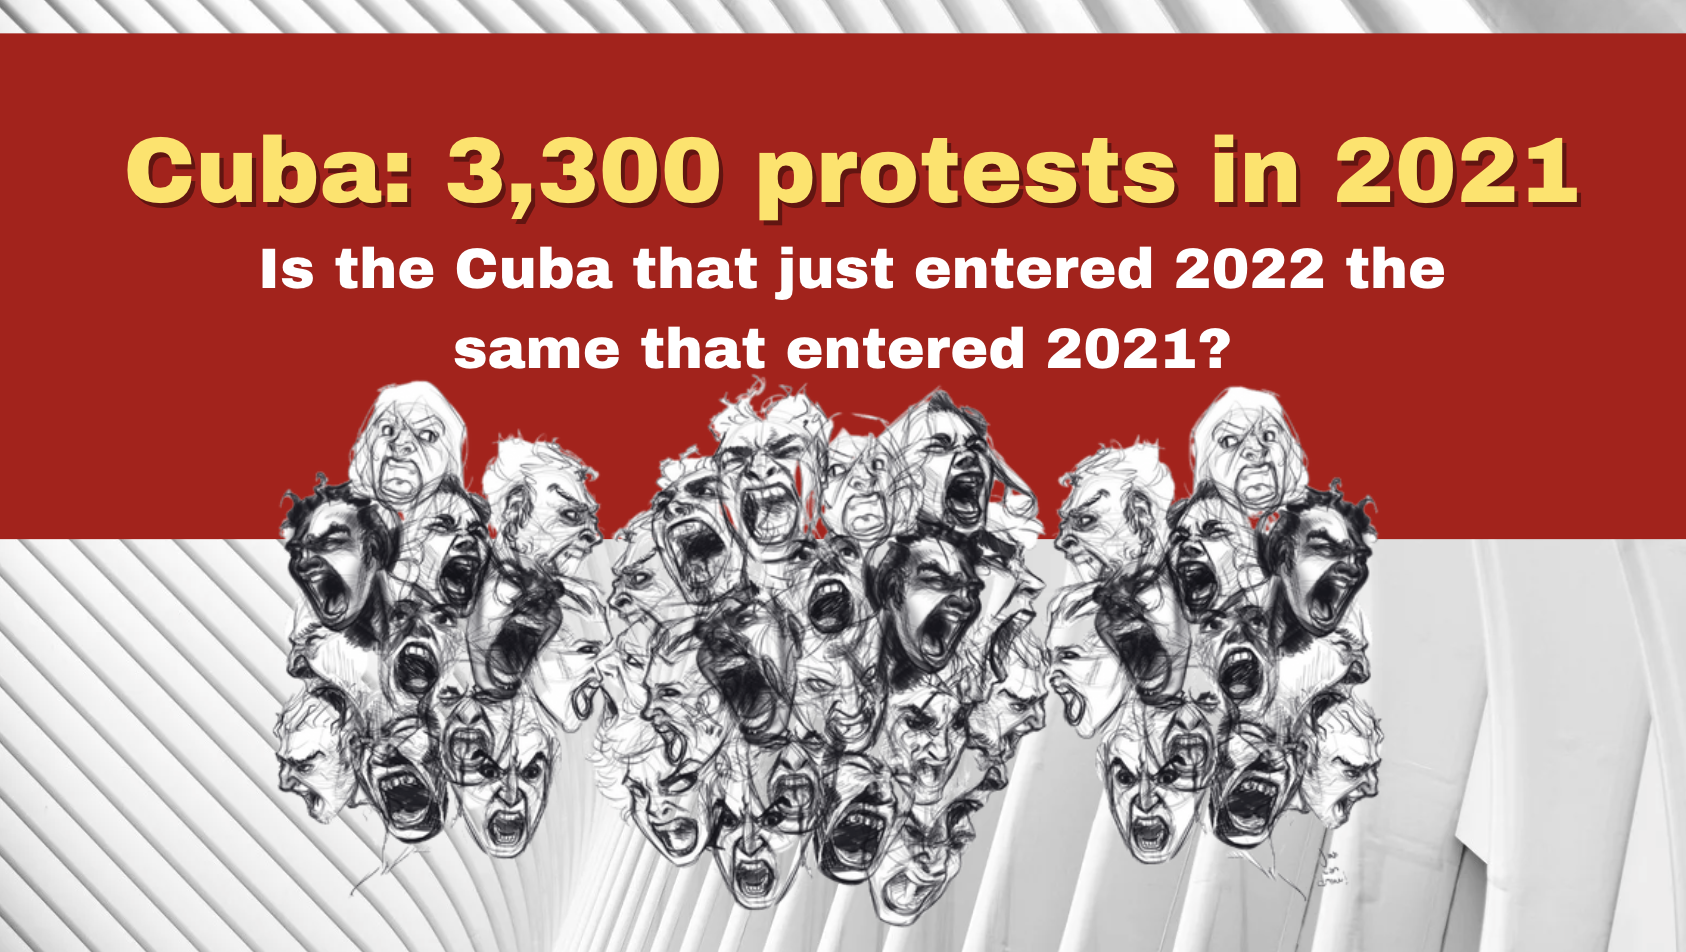 Cuba: 3,300 protests in 2021. Is the Cuba that just entered 2022 the same that entered 2021?